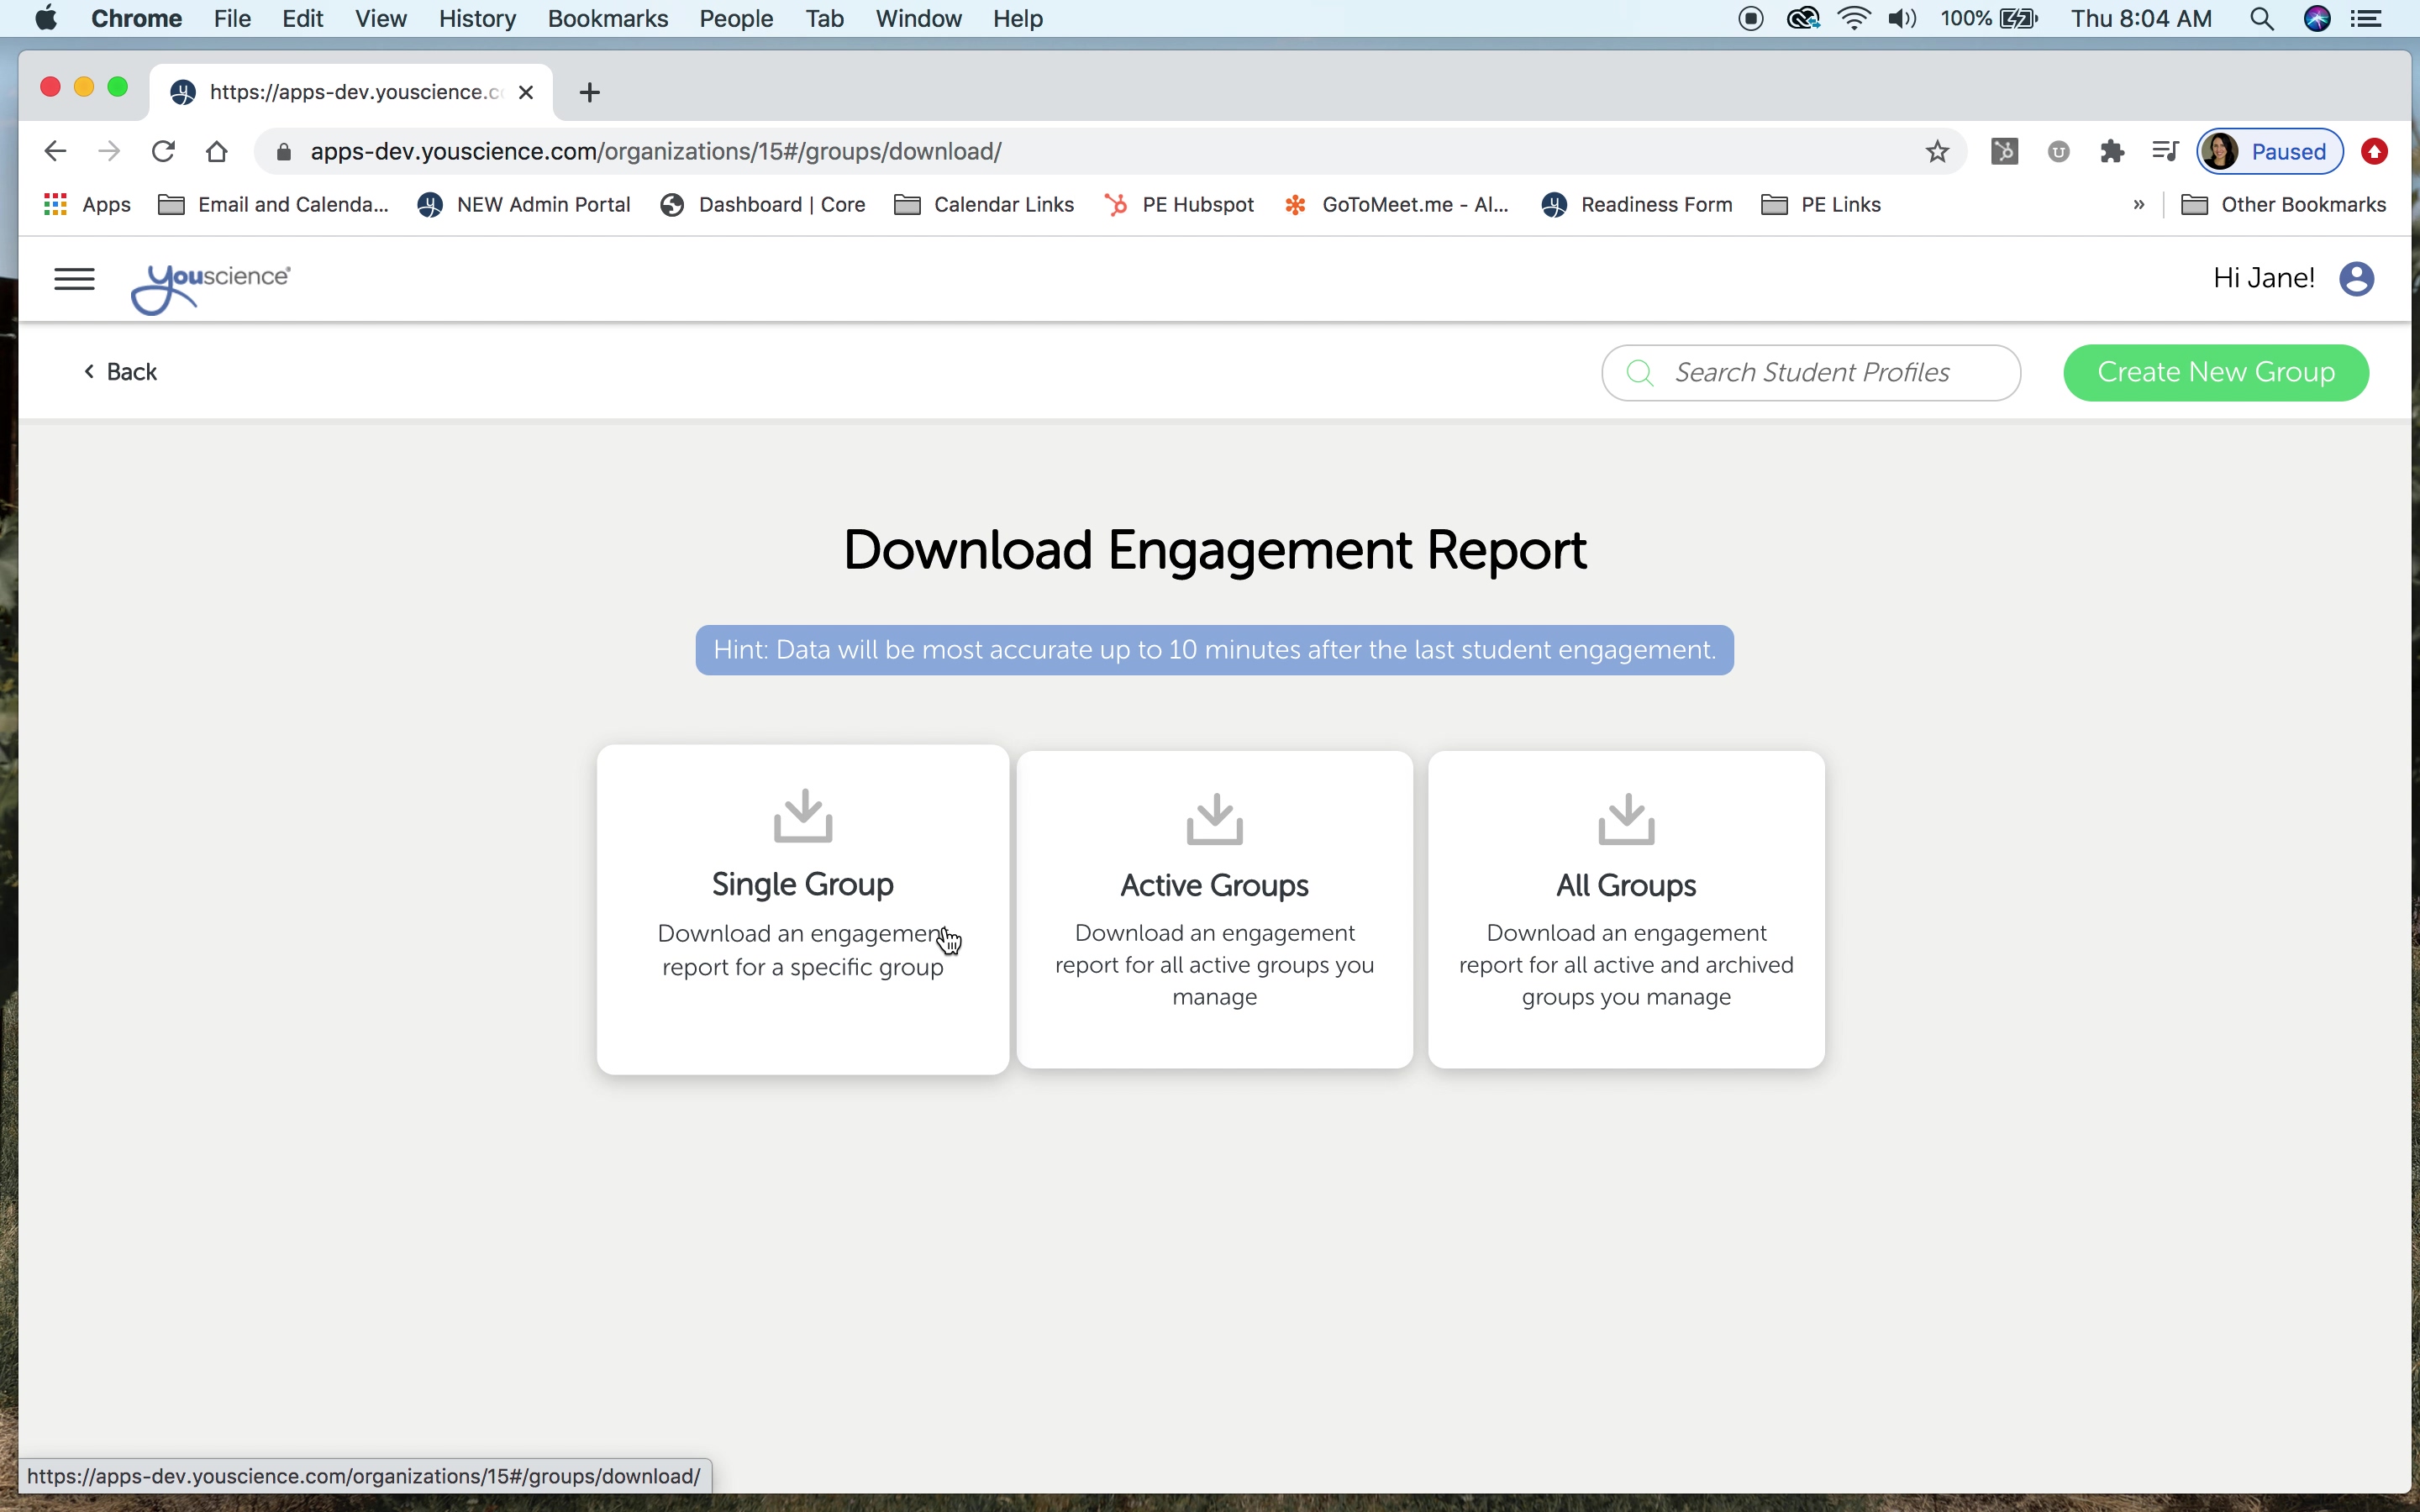 How to Download the Engagement Report